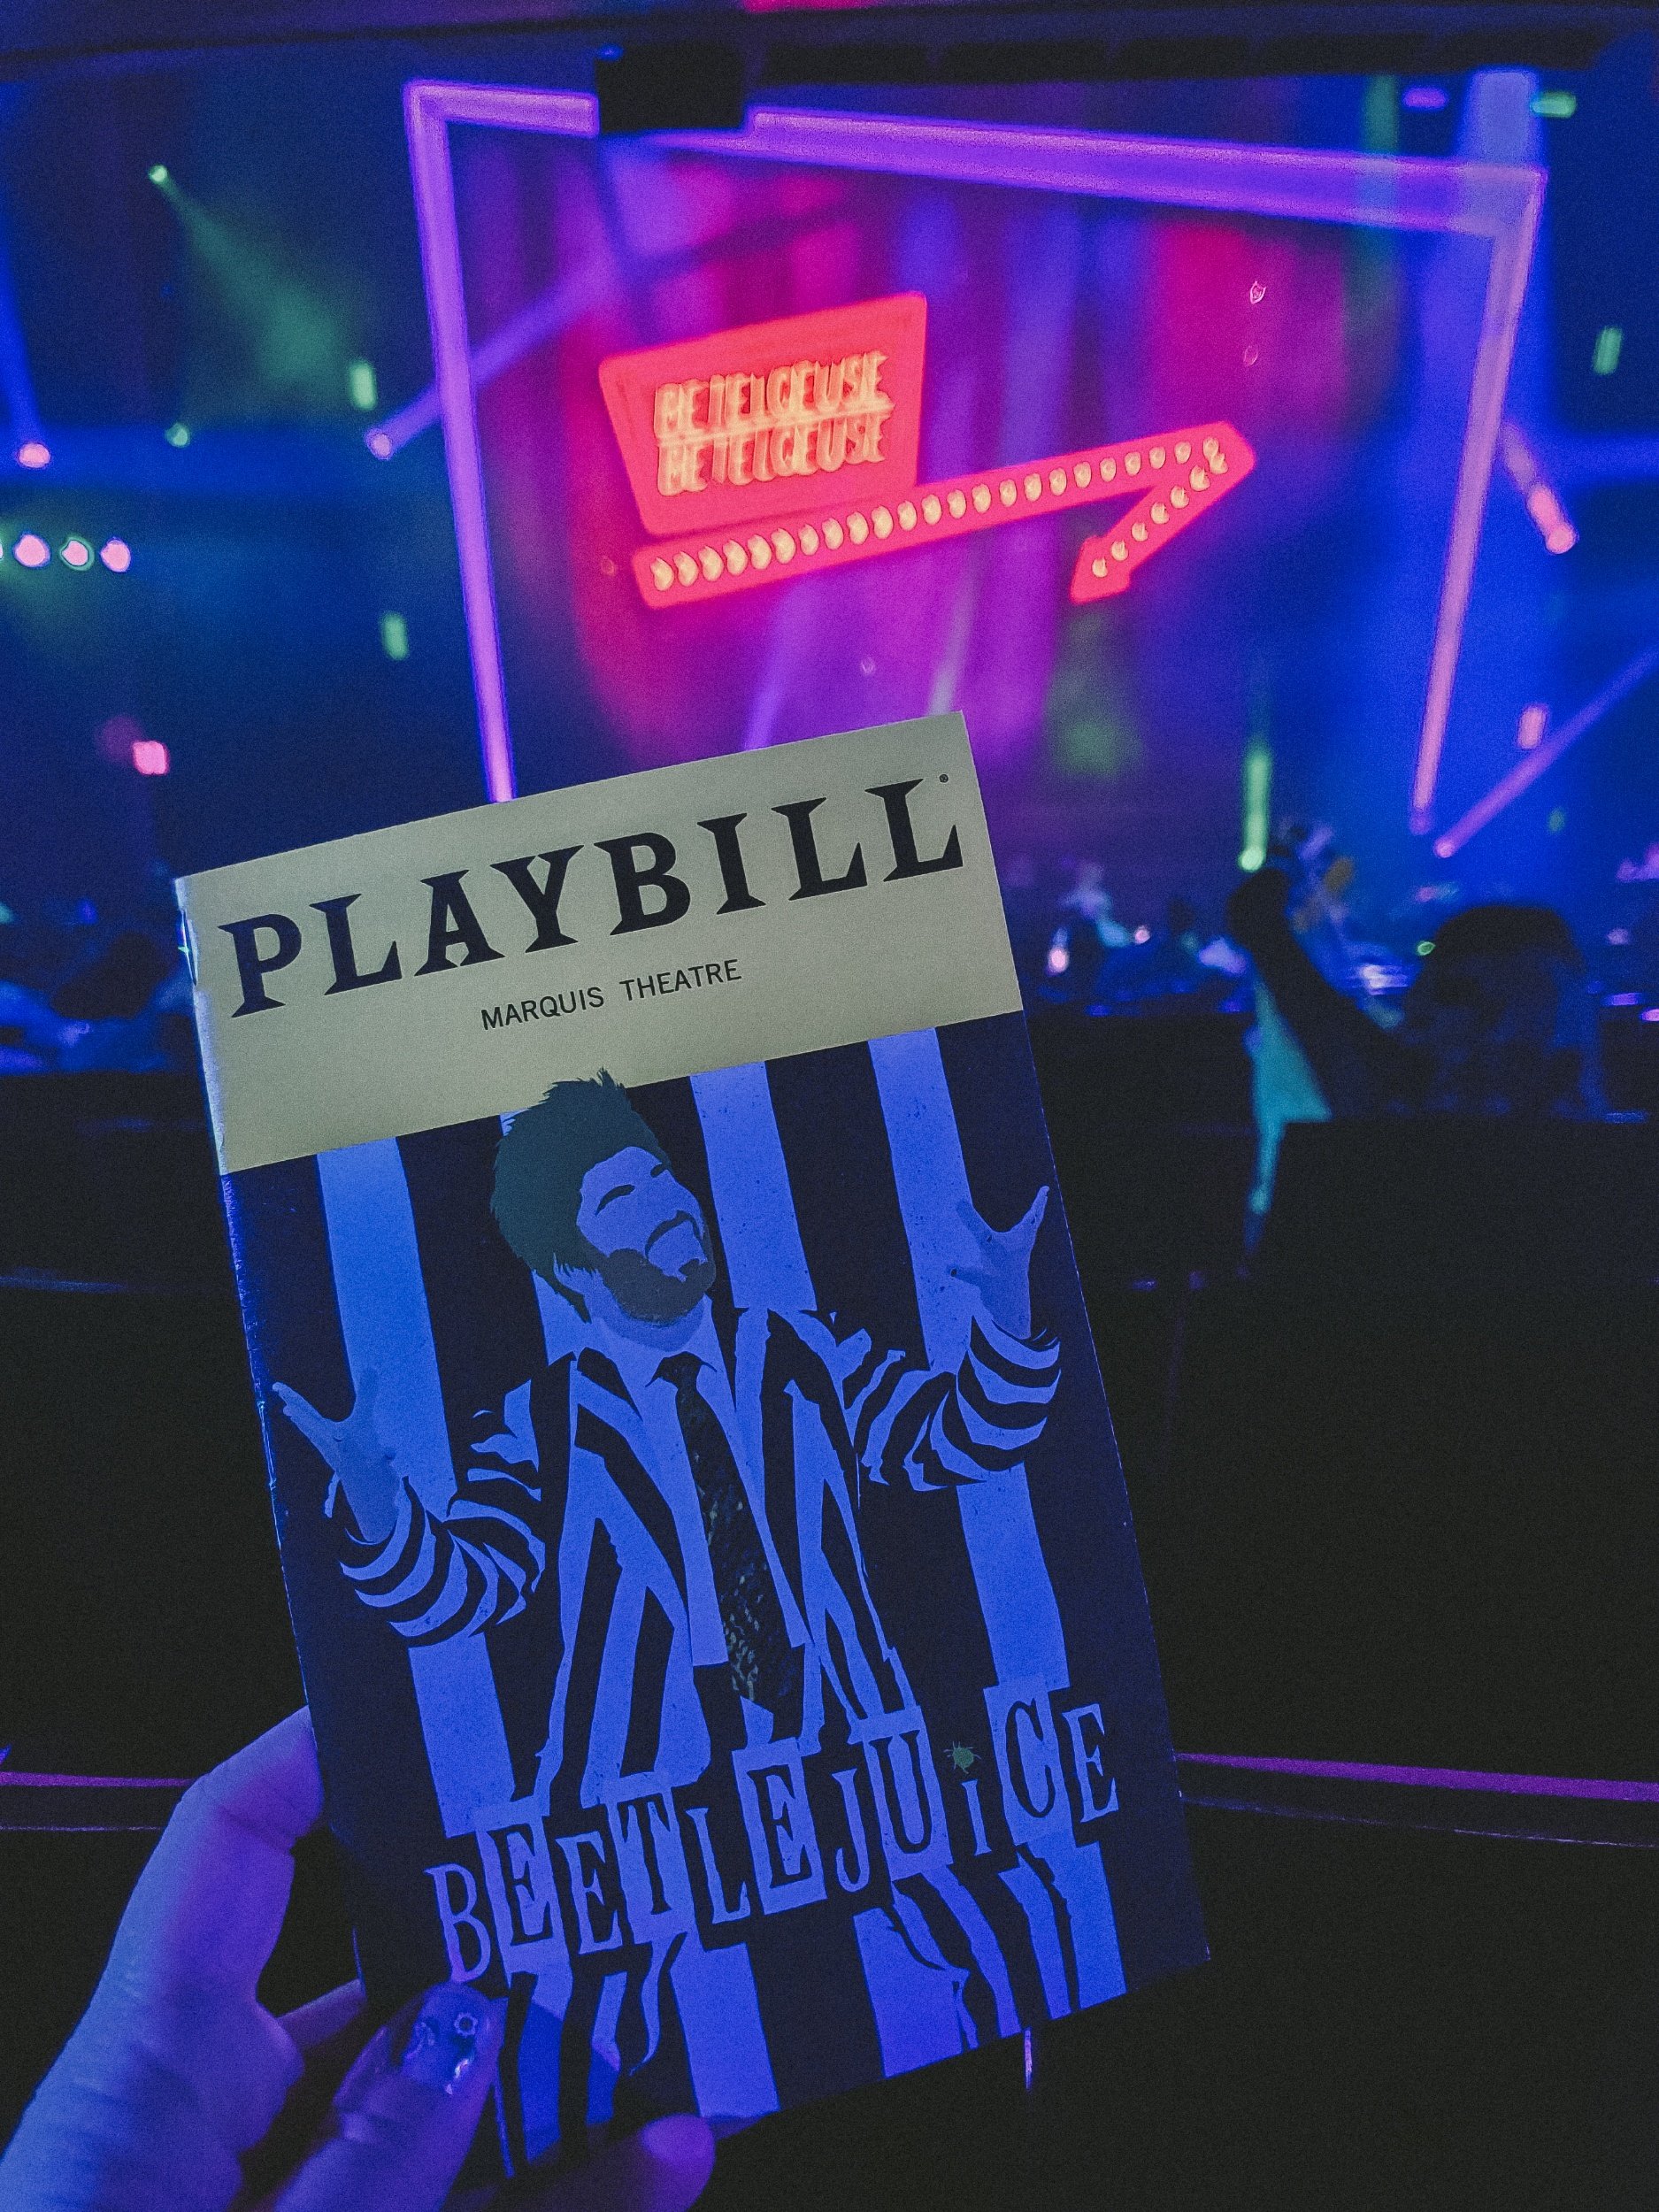 Got to see Beetlejuice on Broadway for my birthday!!